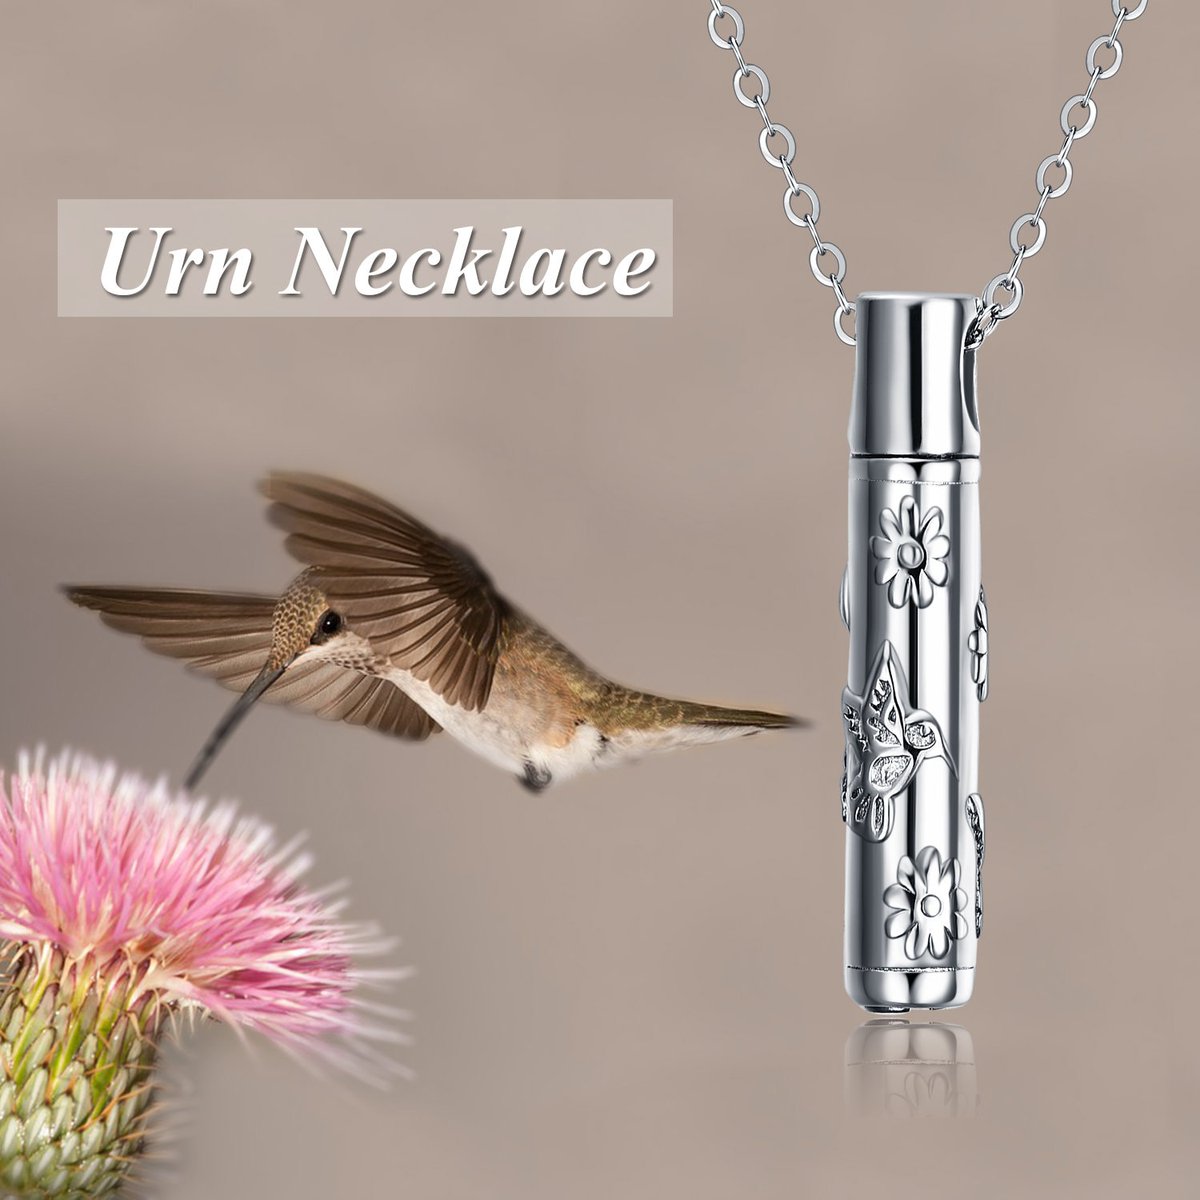 Excited to share the latest addition to my #etsy shop: Hummingbird Urn Necklace for Cremated Ashes etsy.me/3CnoSun #silver #griefmourning #necklace #unisexadults #steel #human #minimalist #recycledmetal #urnforhumanashes